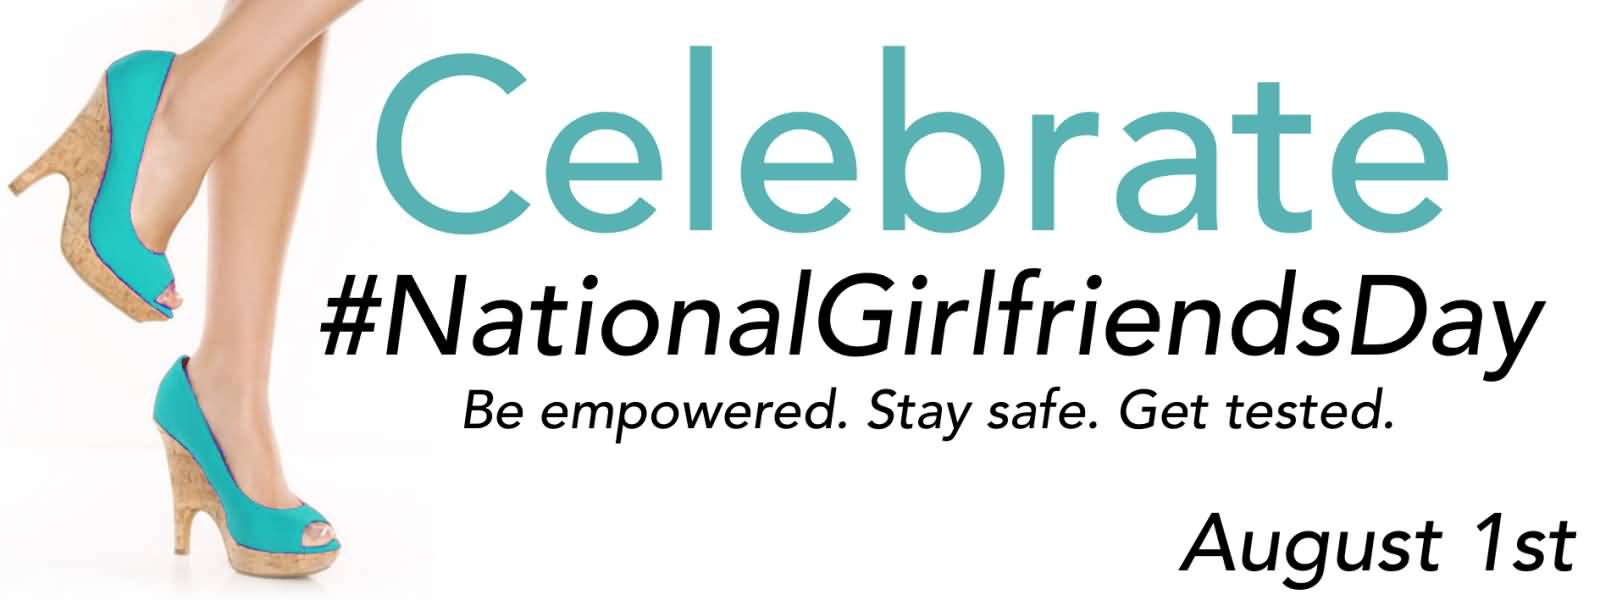 Celebrate National Girlfriends Day August 1st Facebook Cover Picture